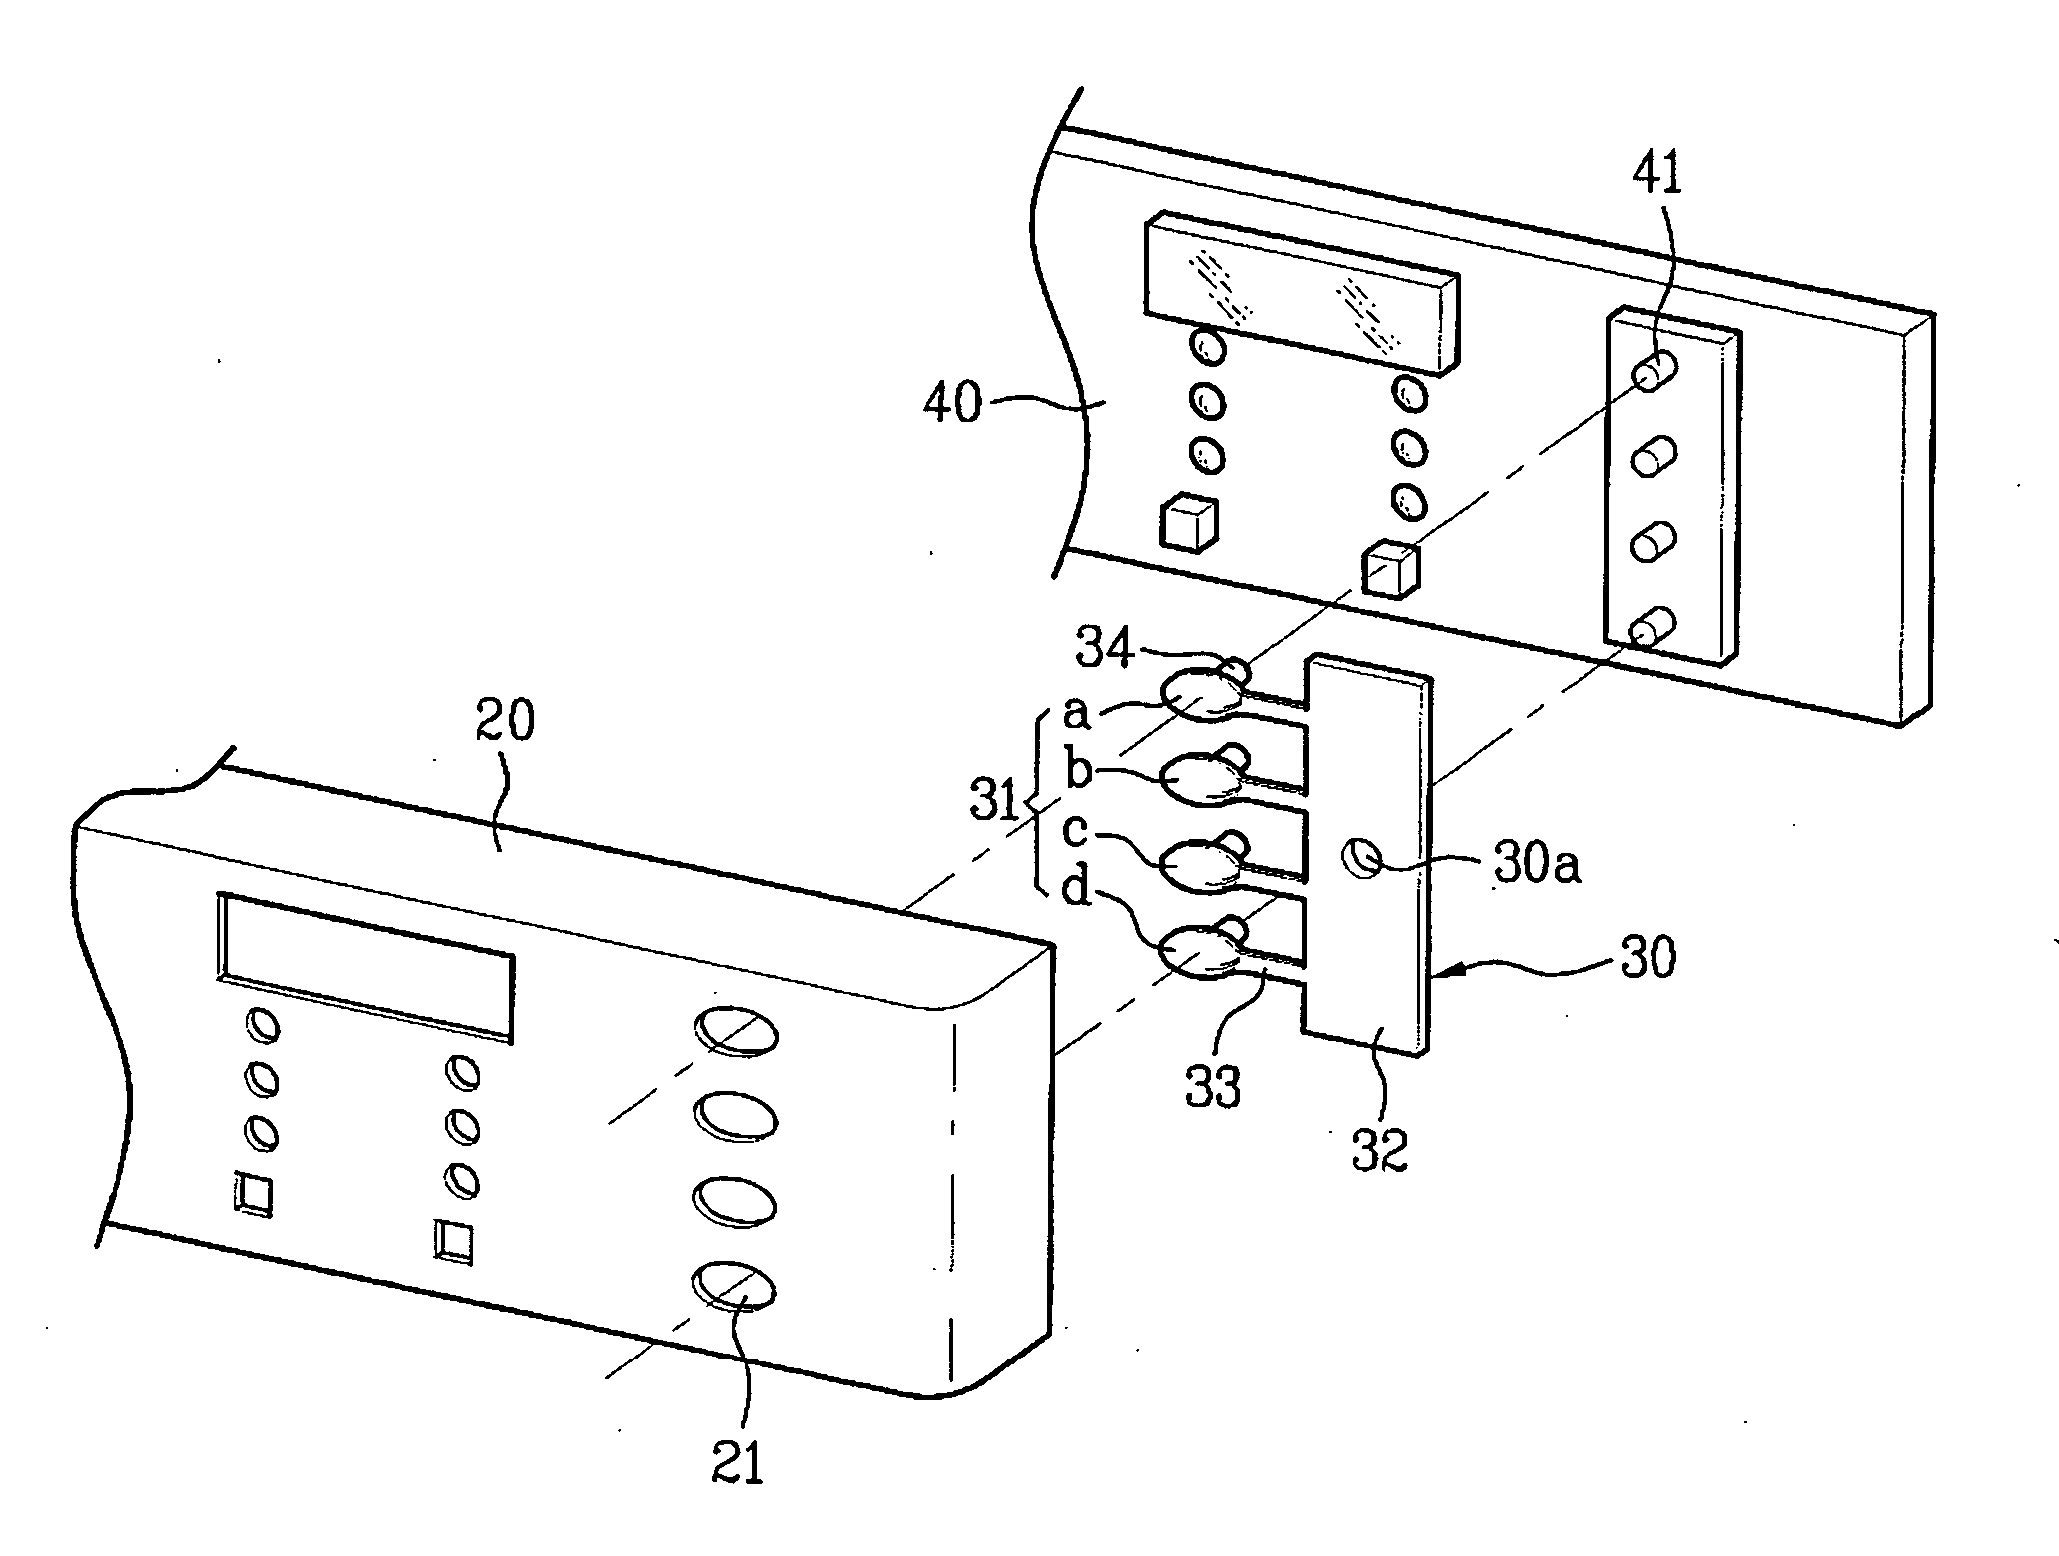 Button assembly of control panel assembly